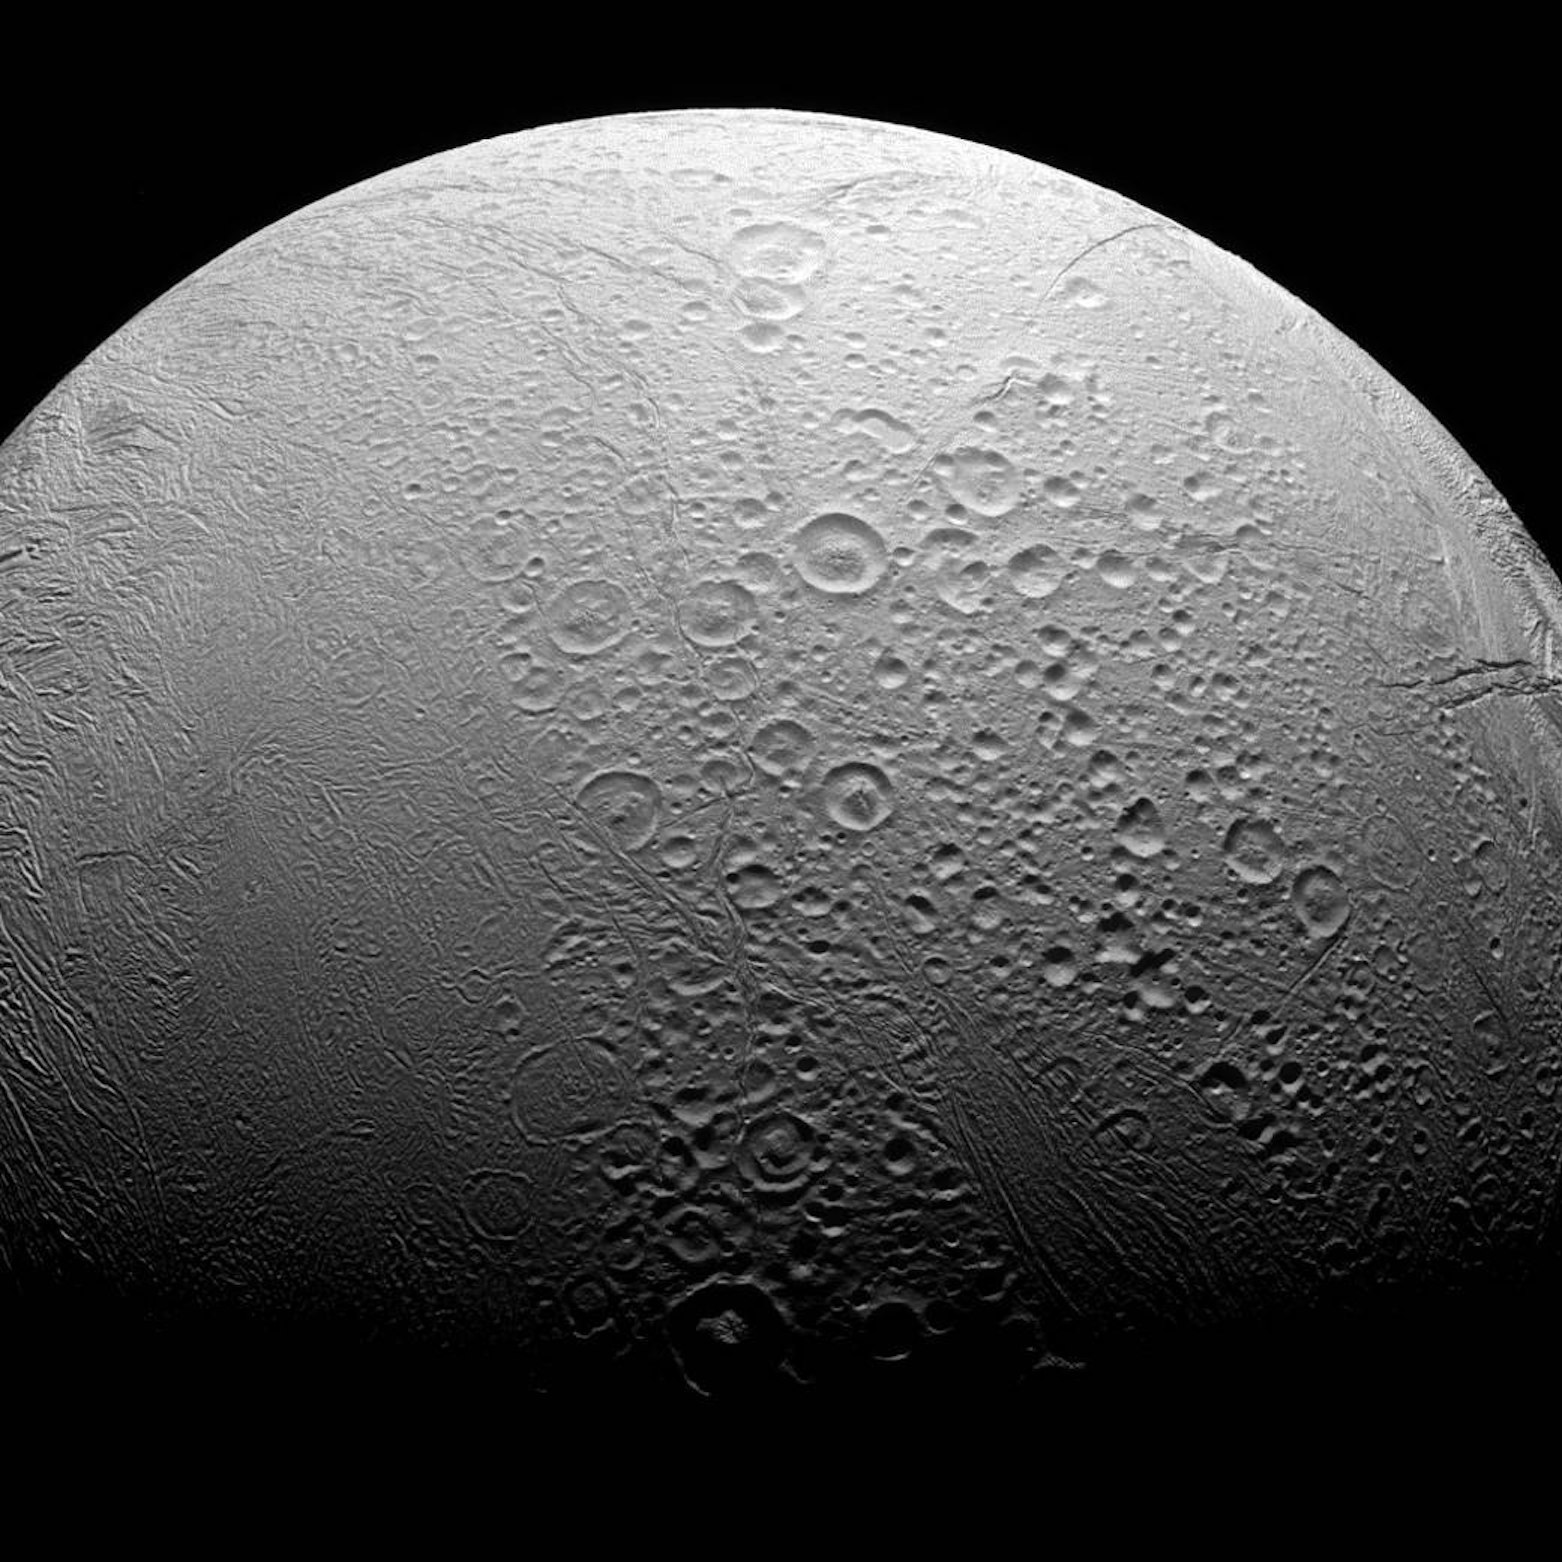 Does this icy moon really contain life beneath its surface? 